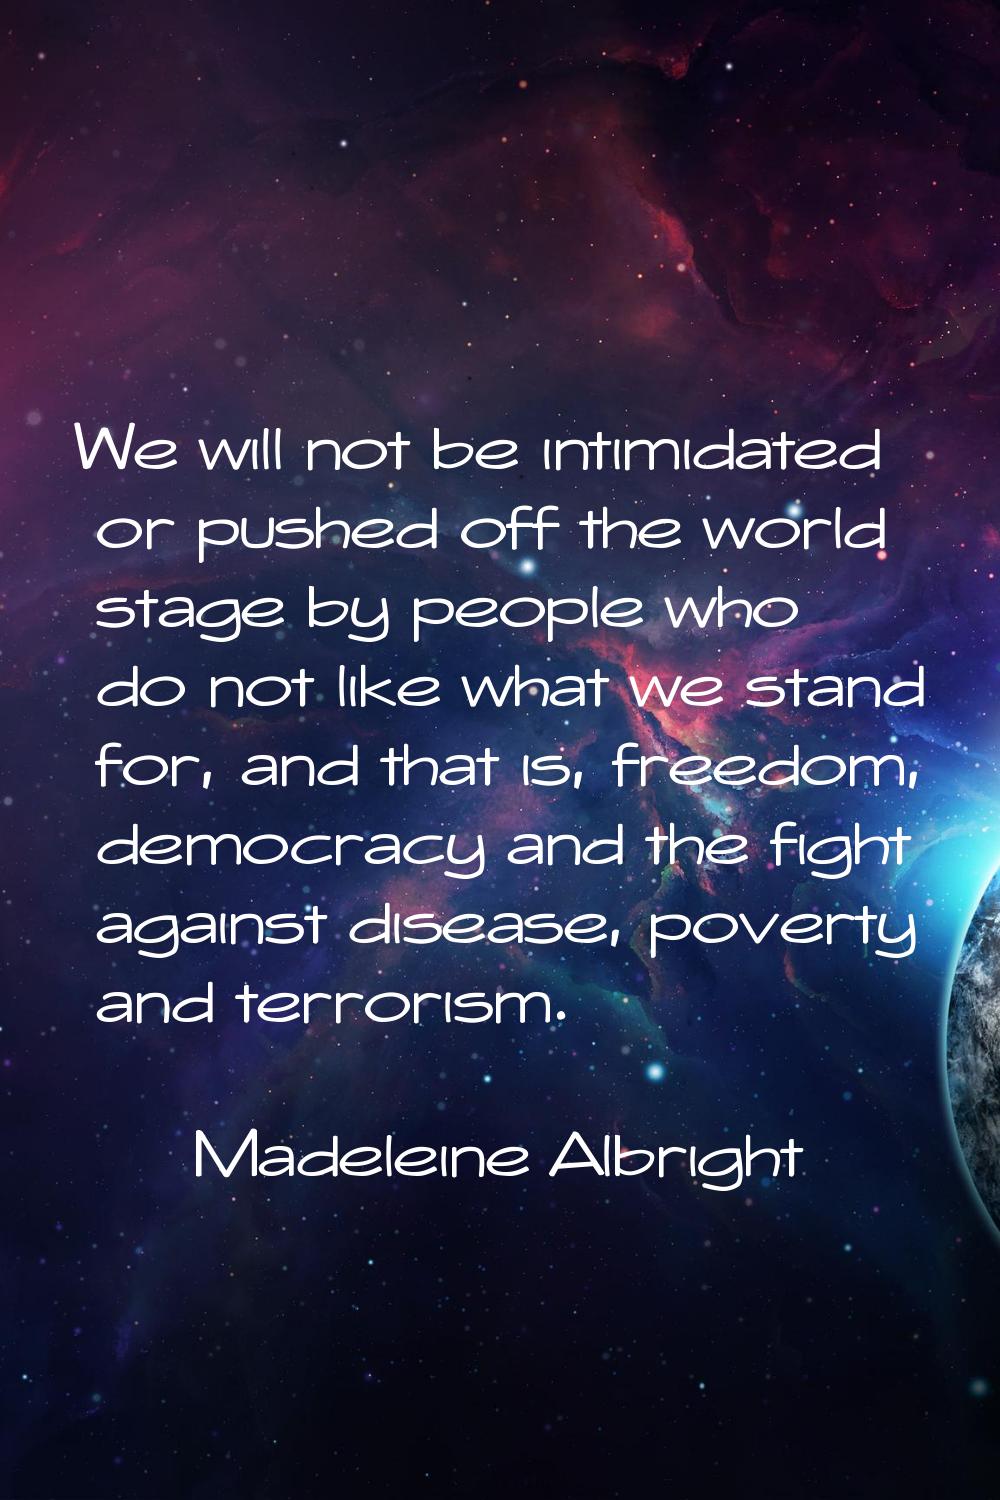 We will not be intimidated or pushed off the world stage by people who do not like what we stand fo